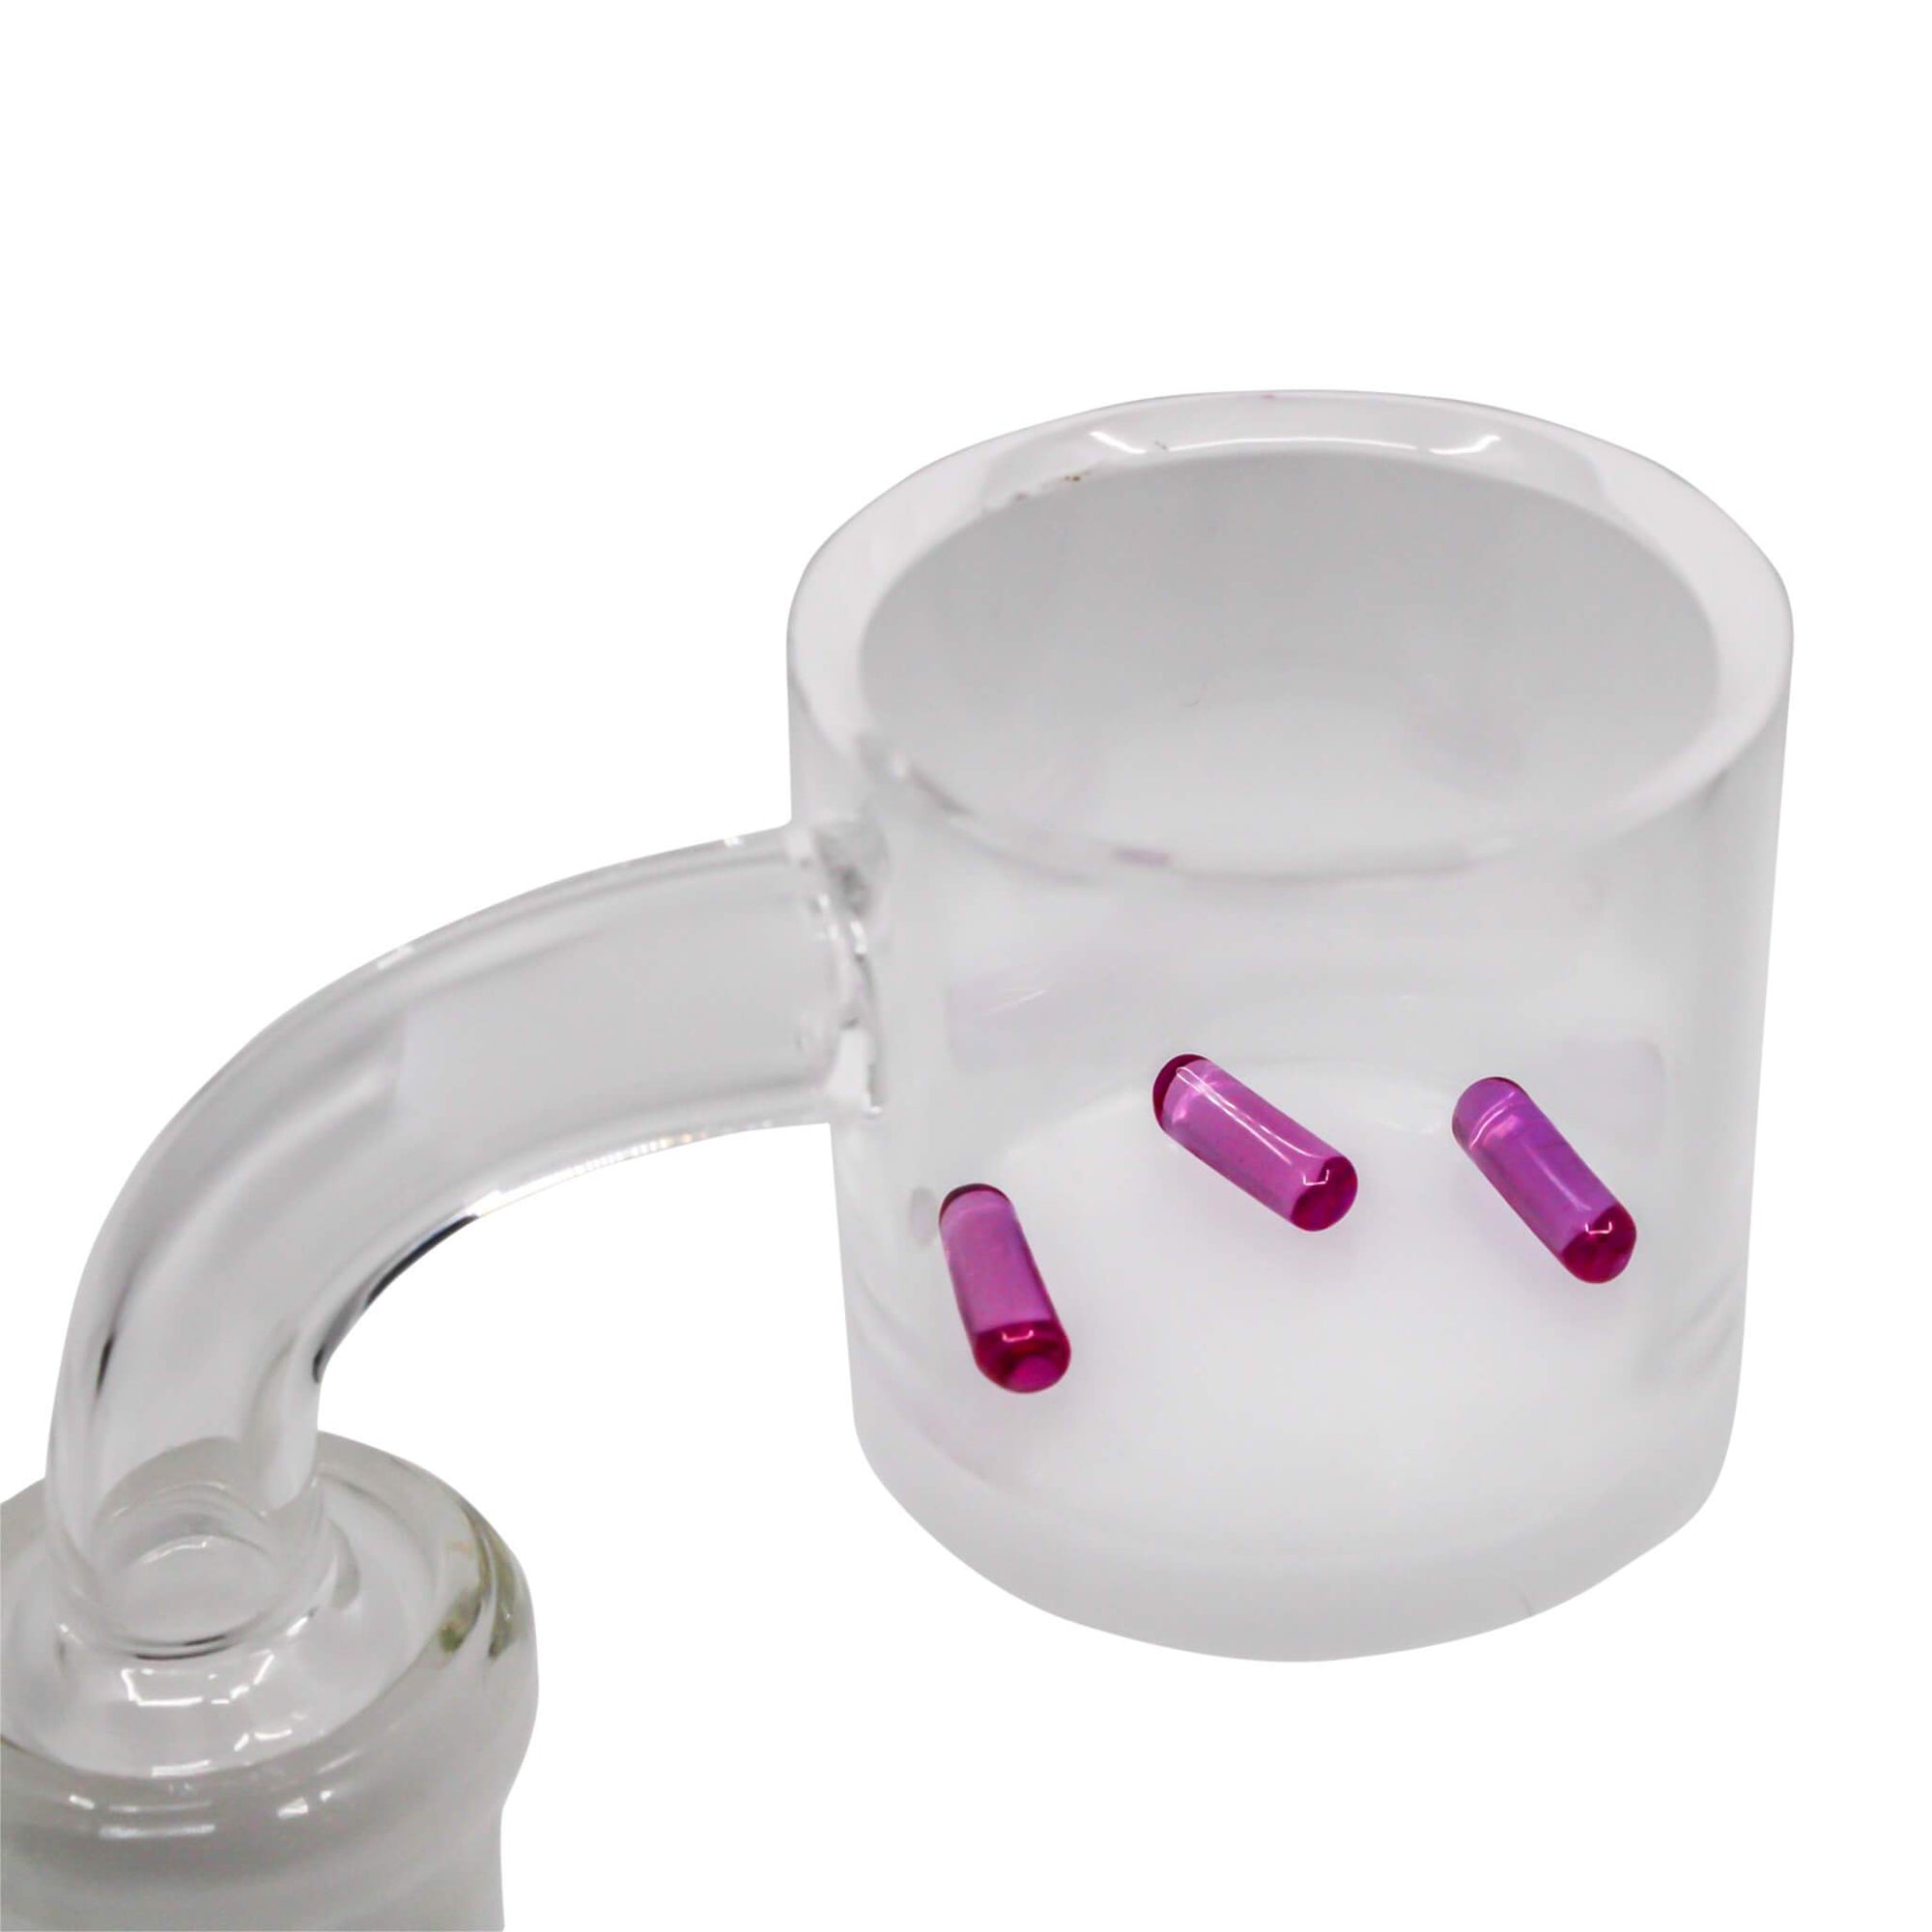 Ruby Capsule Inserts (3-Pack) | Ruby Capsule Trio View | the dabbing specialists